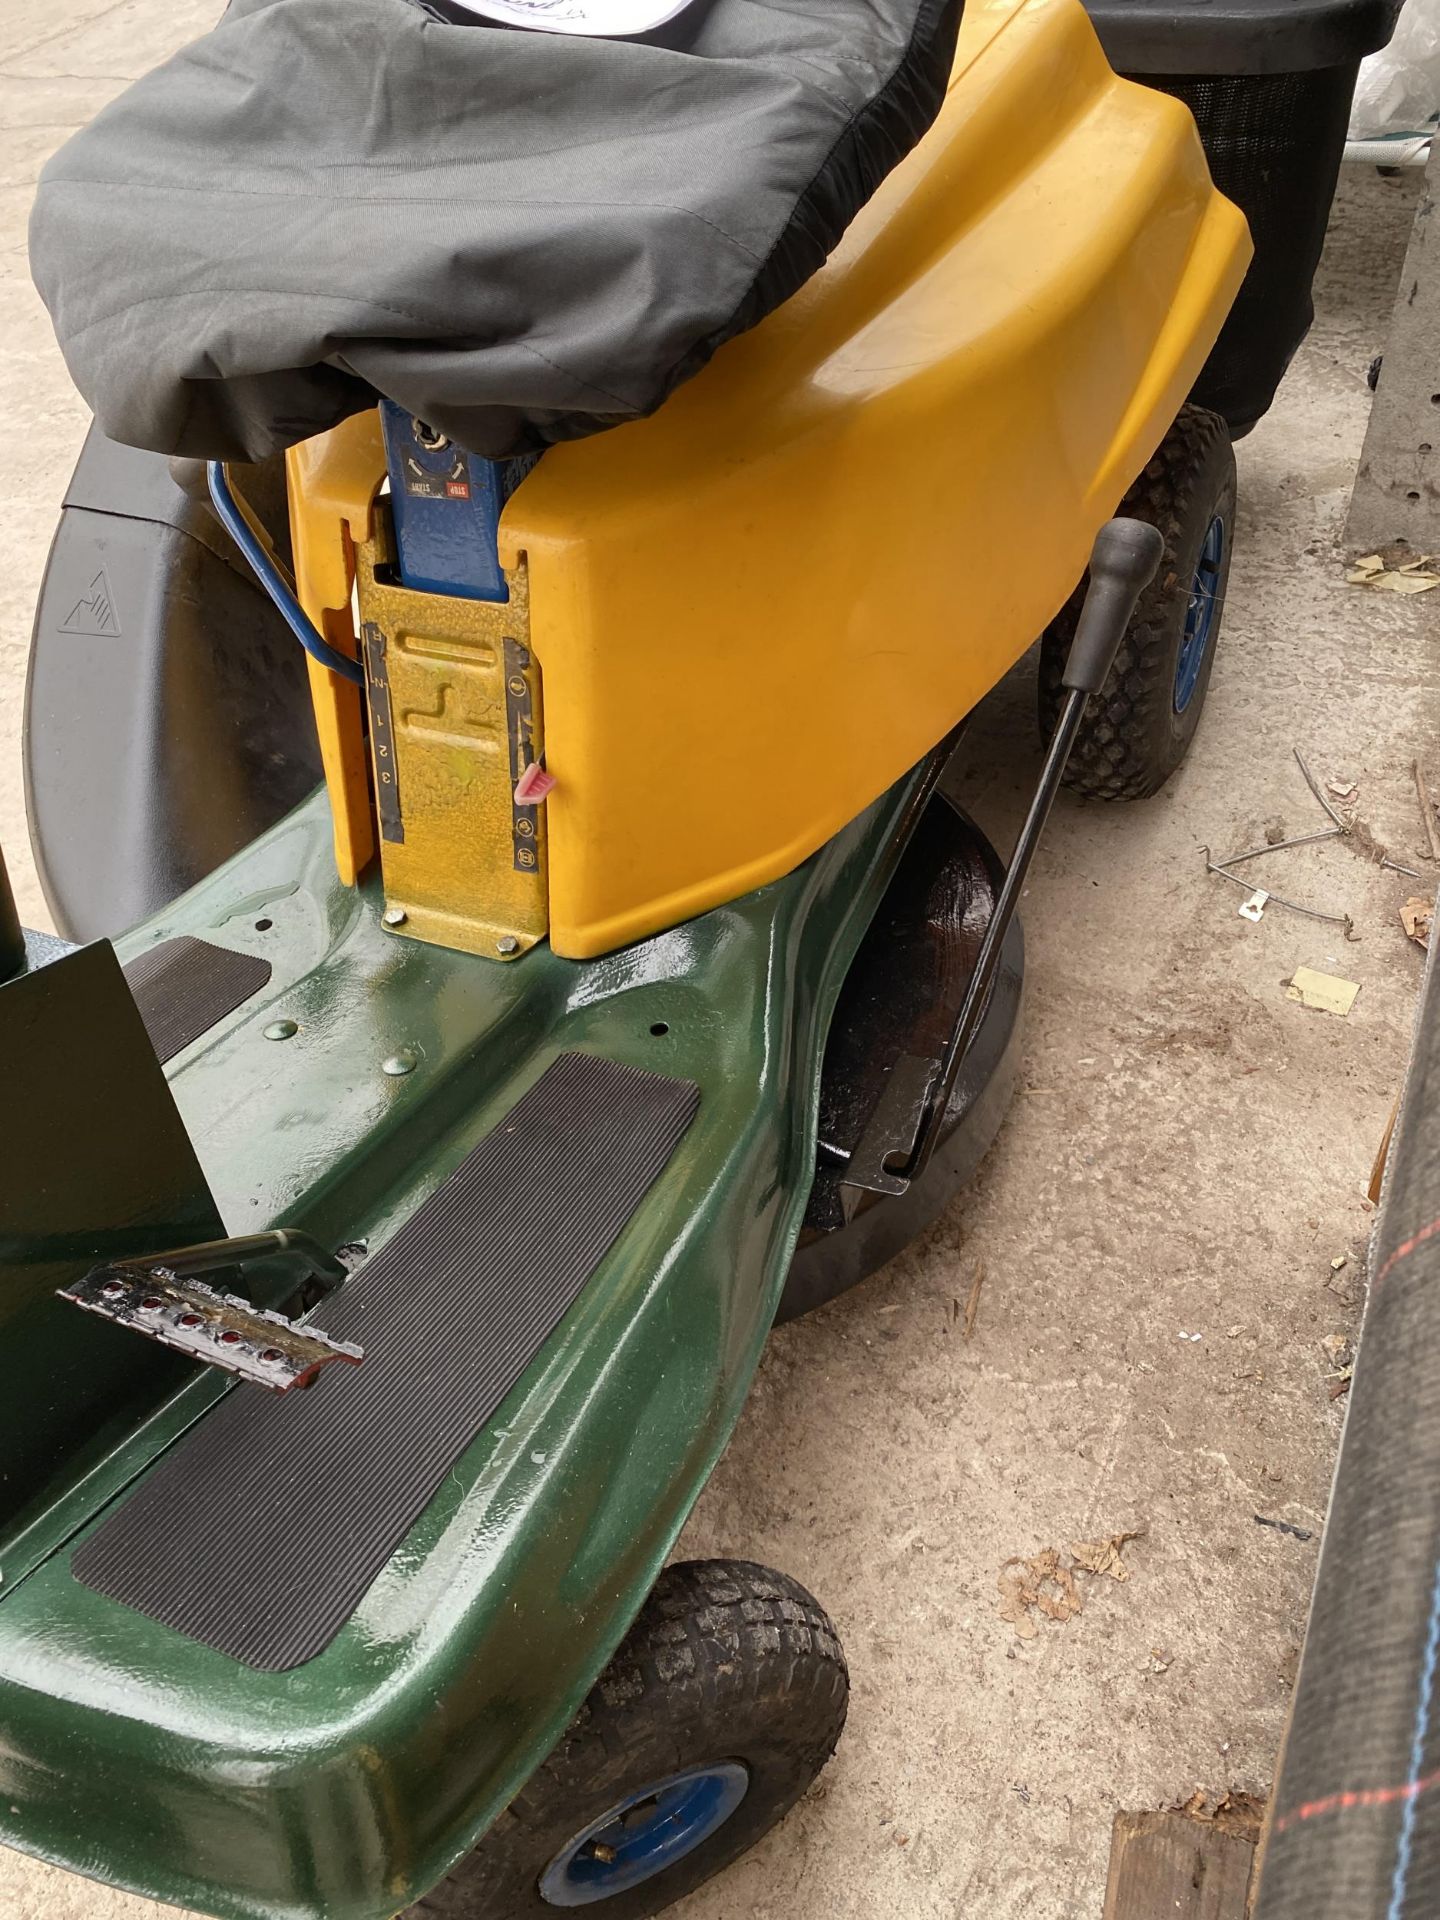 A MCCULLOCH RIDE ON LAWN MOWER WITH GRASS BOX AND KEY BELIEVED IN WORKING ORDER BUT NO WARRANTY - Image 6 of 6